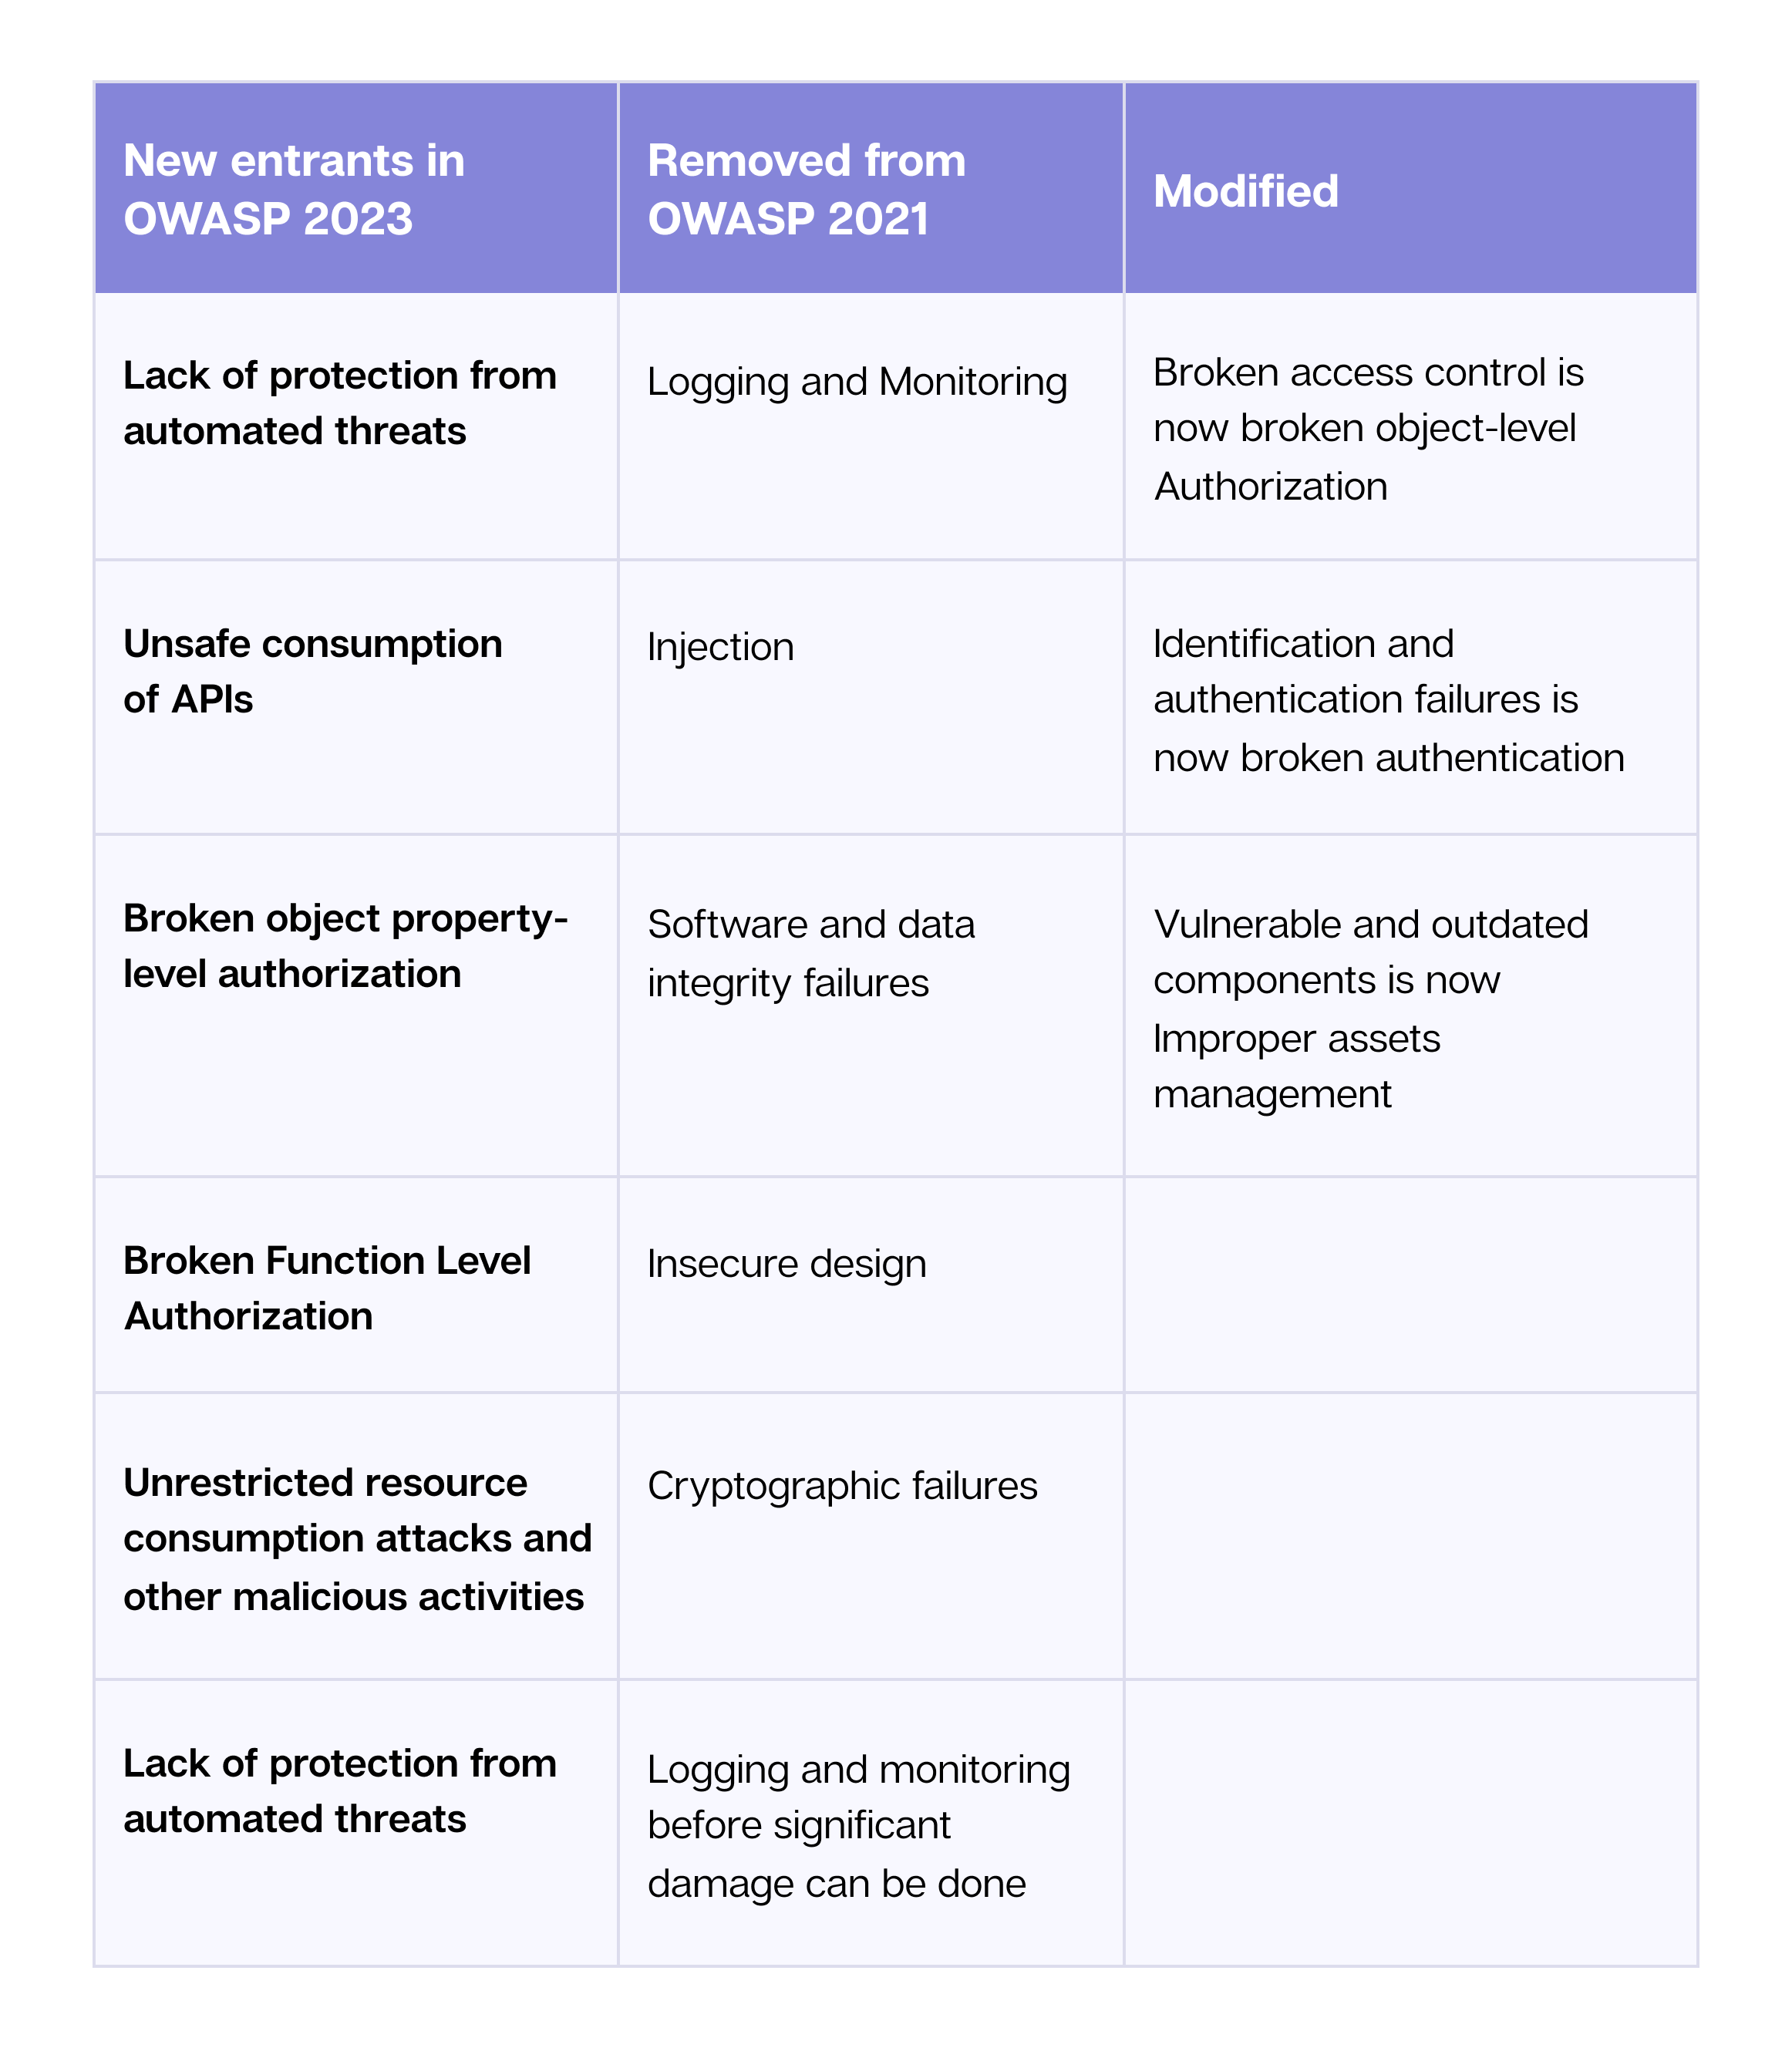 OWASP 2023 vs. OWASP 2021 - what removed and modified